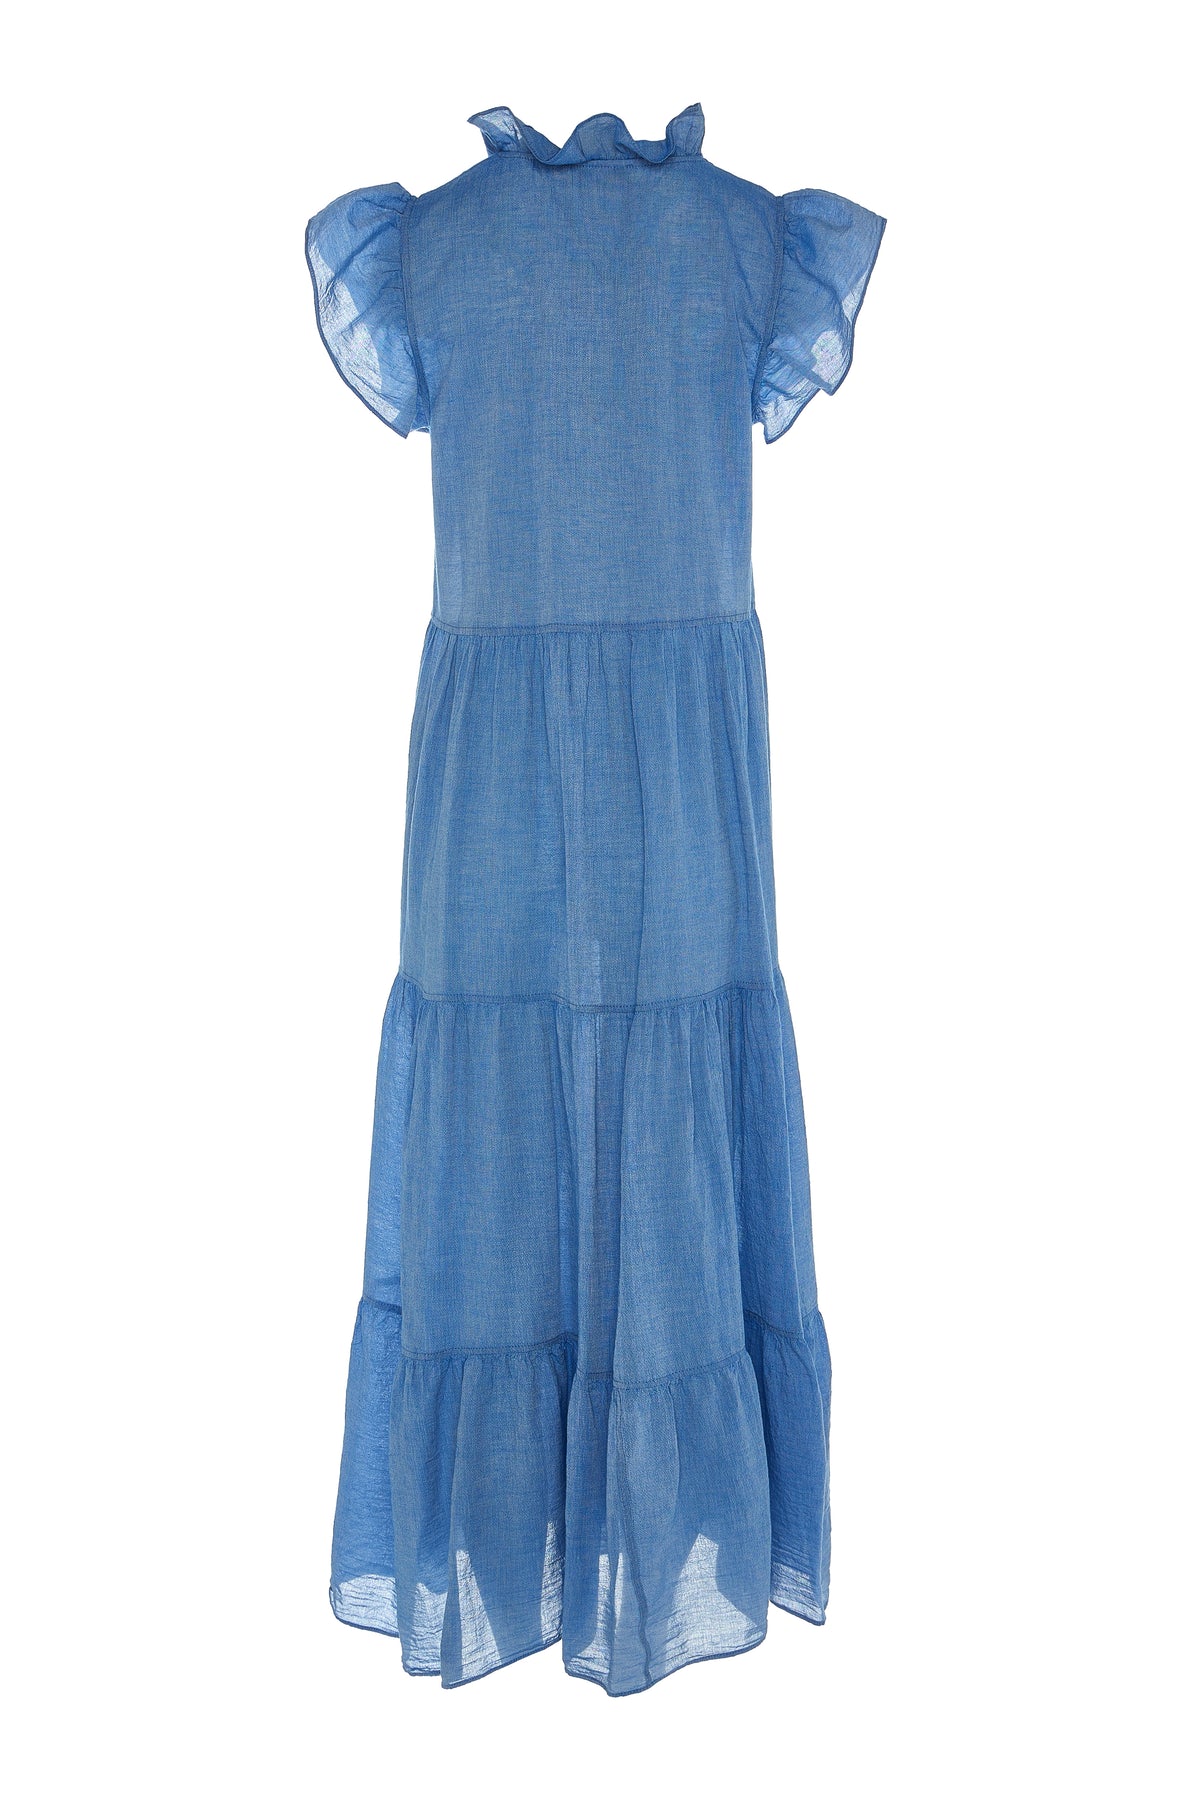 Maxi blue dress with ruffle short sleeves and collar with tiered skirt